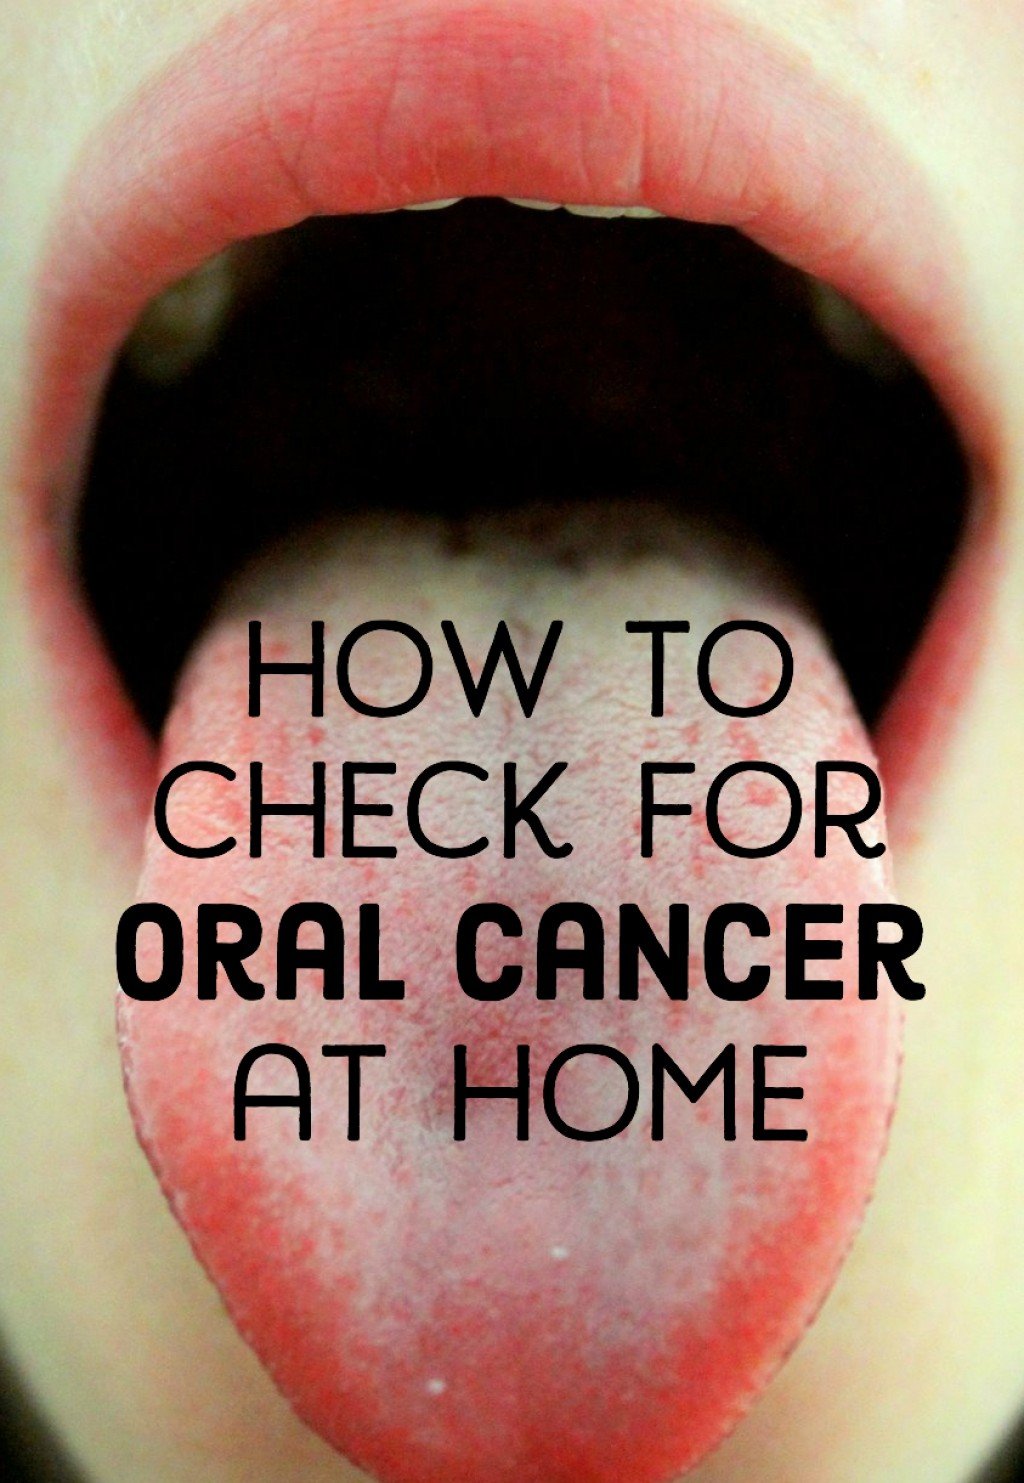 How To Self Check For Oral Cancer | HealDove